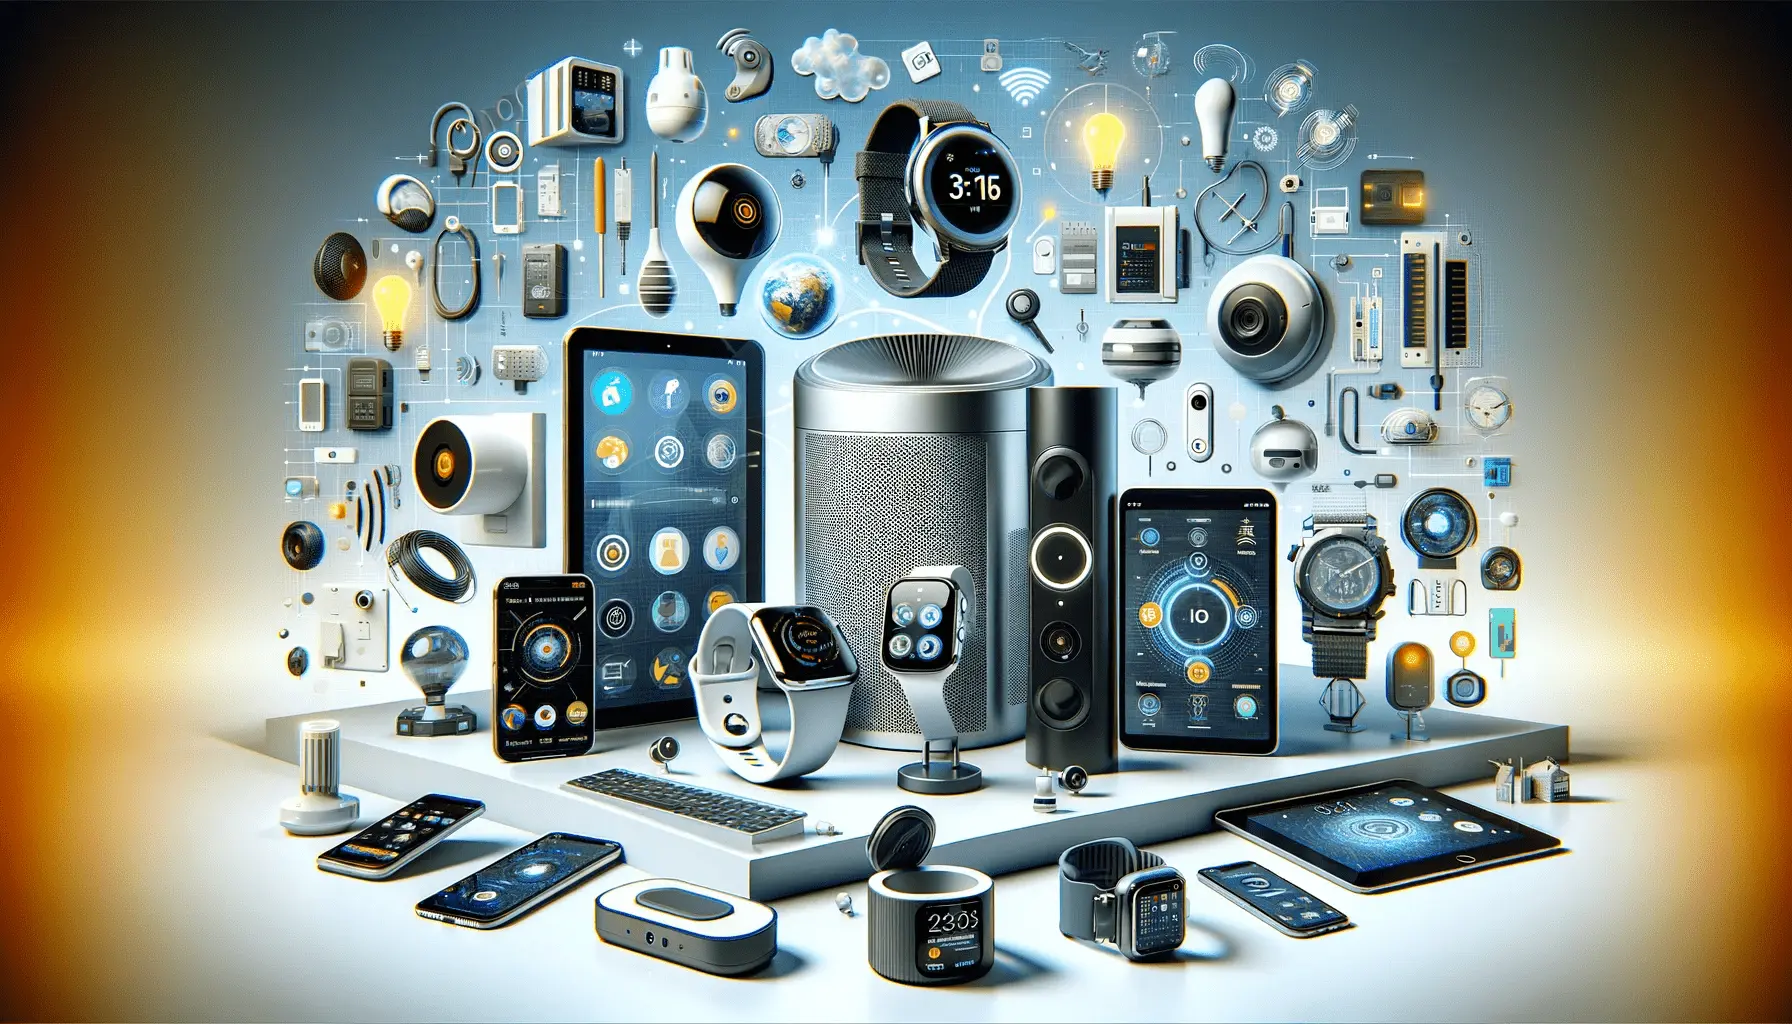 Collage of Top 5 IoT Devices